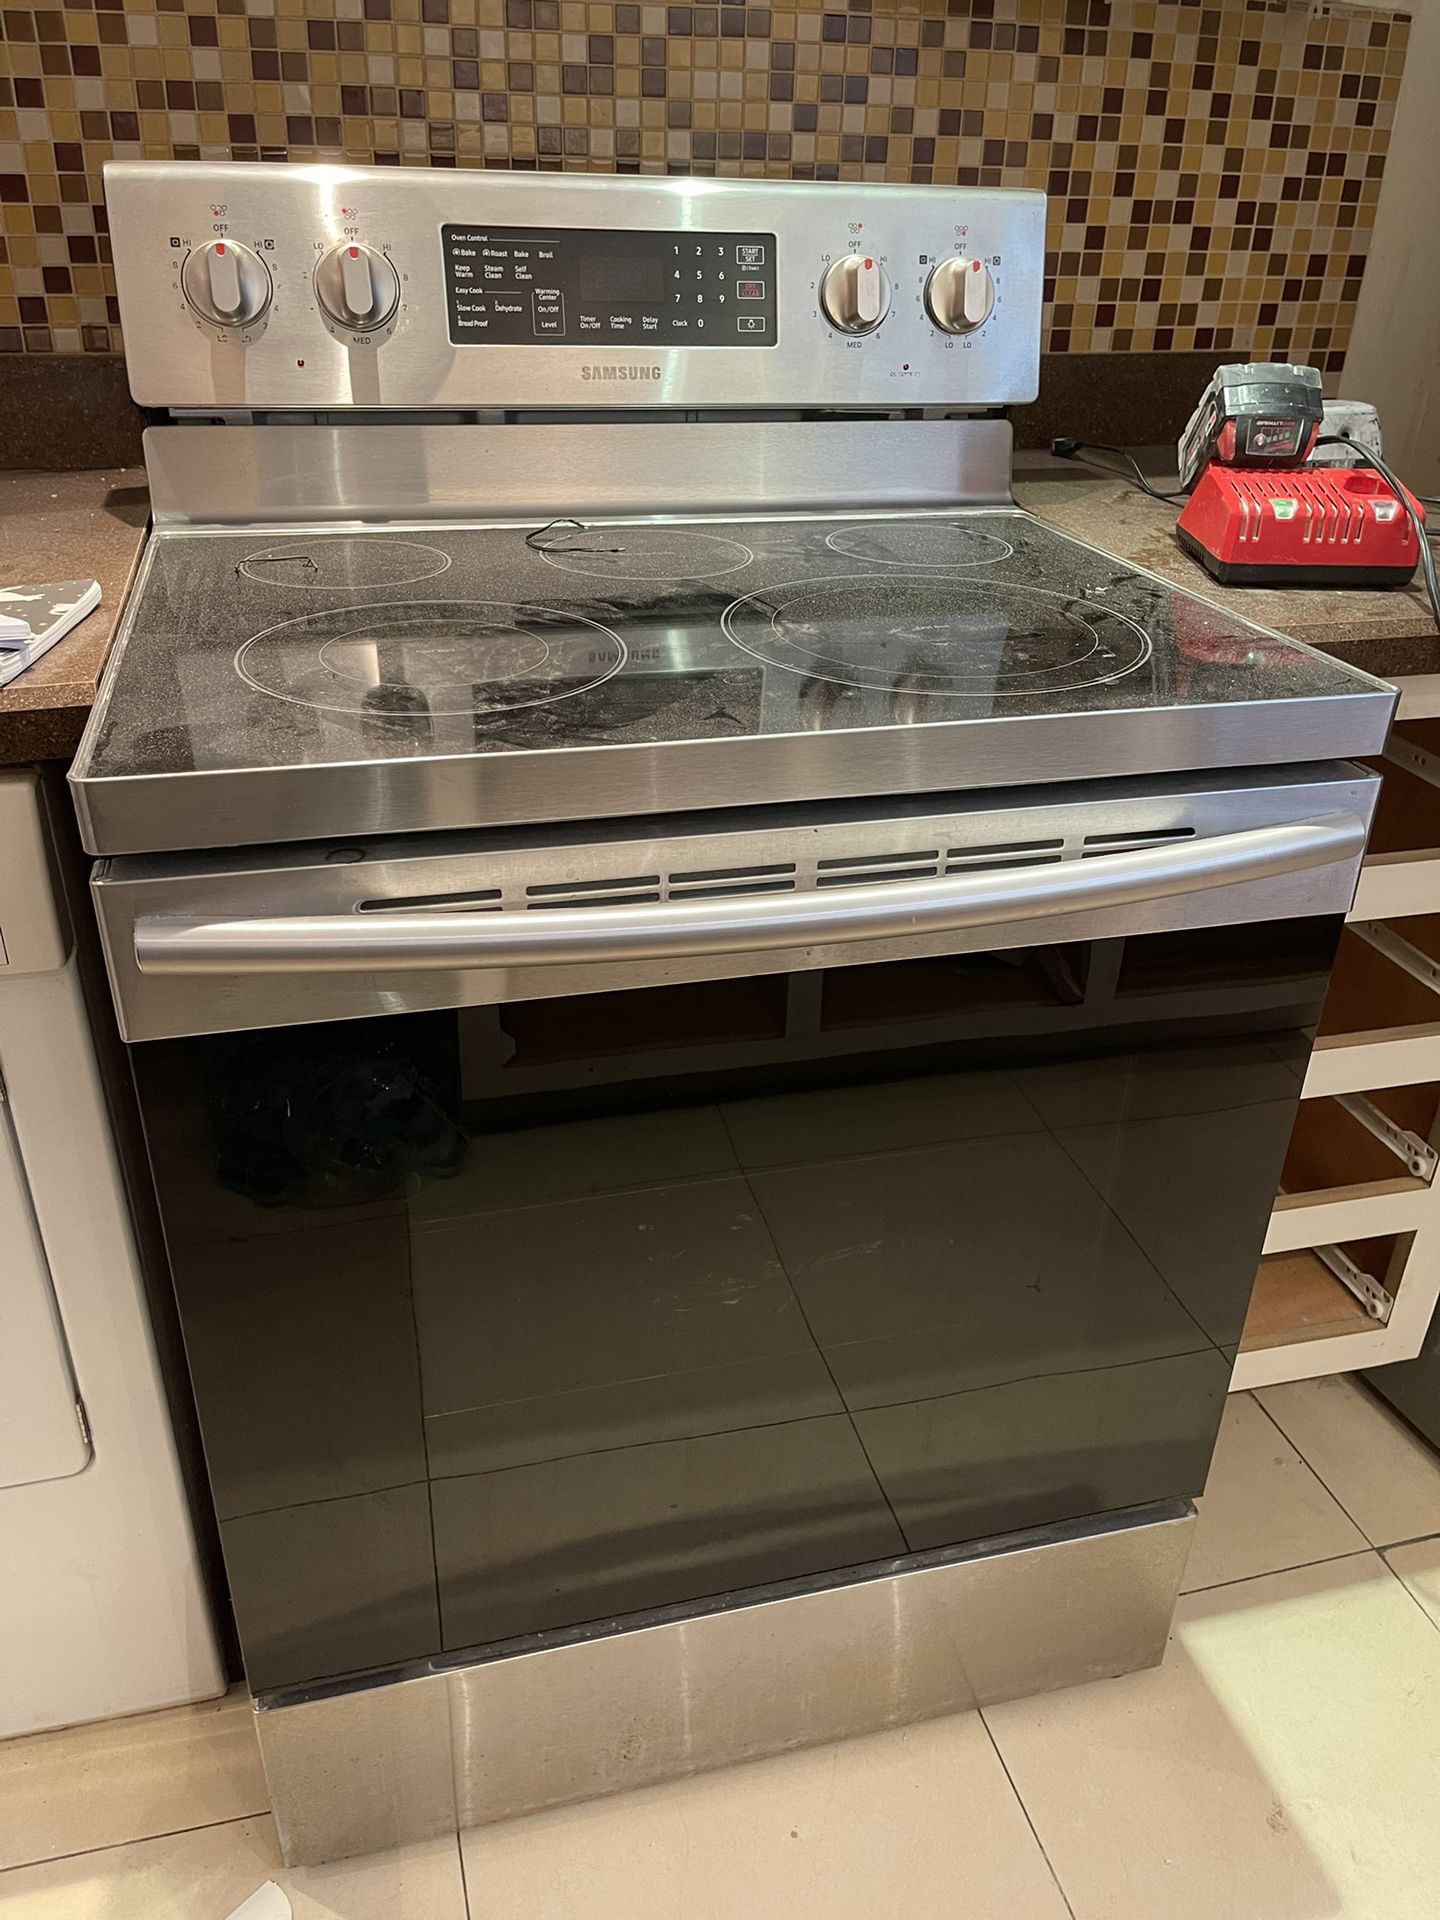 Stainless Steel Samsung Convection Oven Stove Appliance Kitchen 